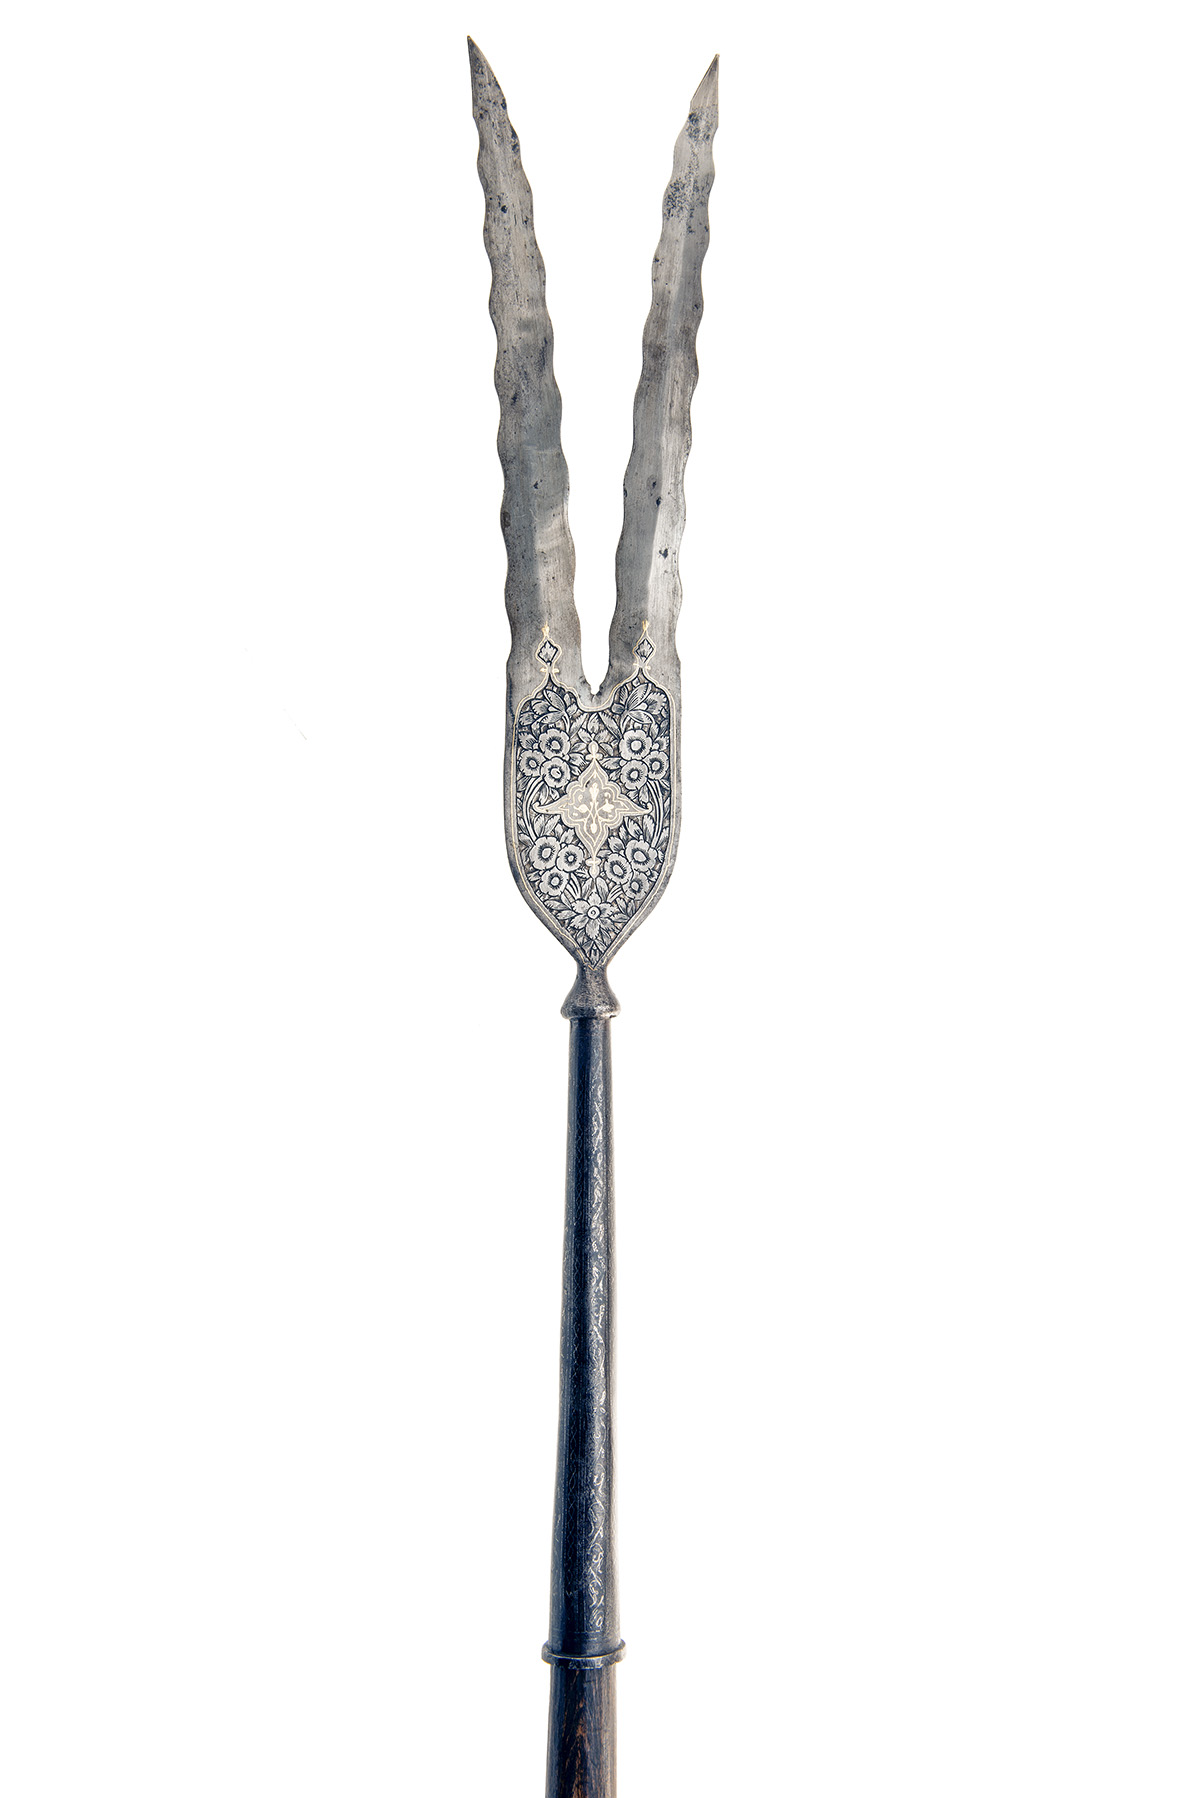 A GOOD INDO-PERSIAN 'SNAKETONGUE' POLEARM HEAD, mid 19th century, the head on a tapering iron socket